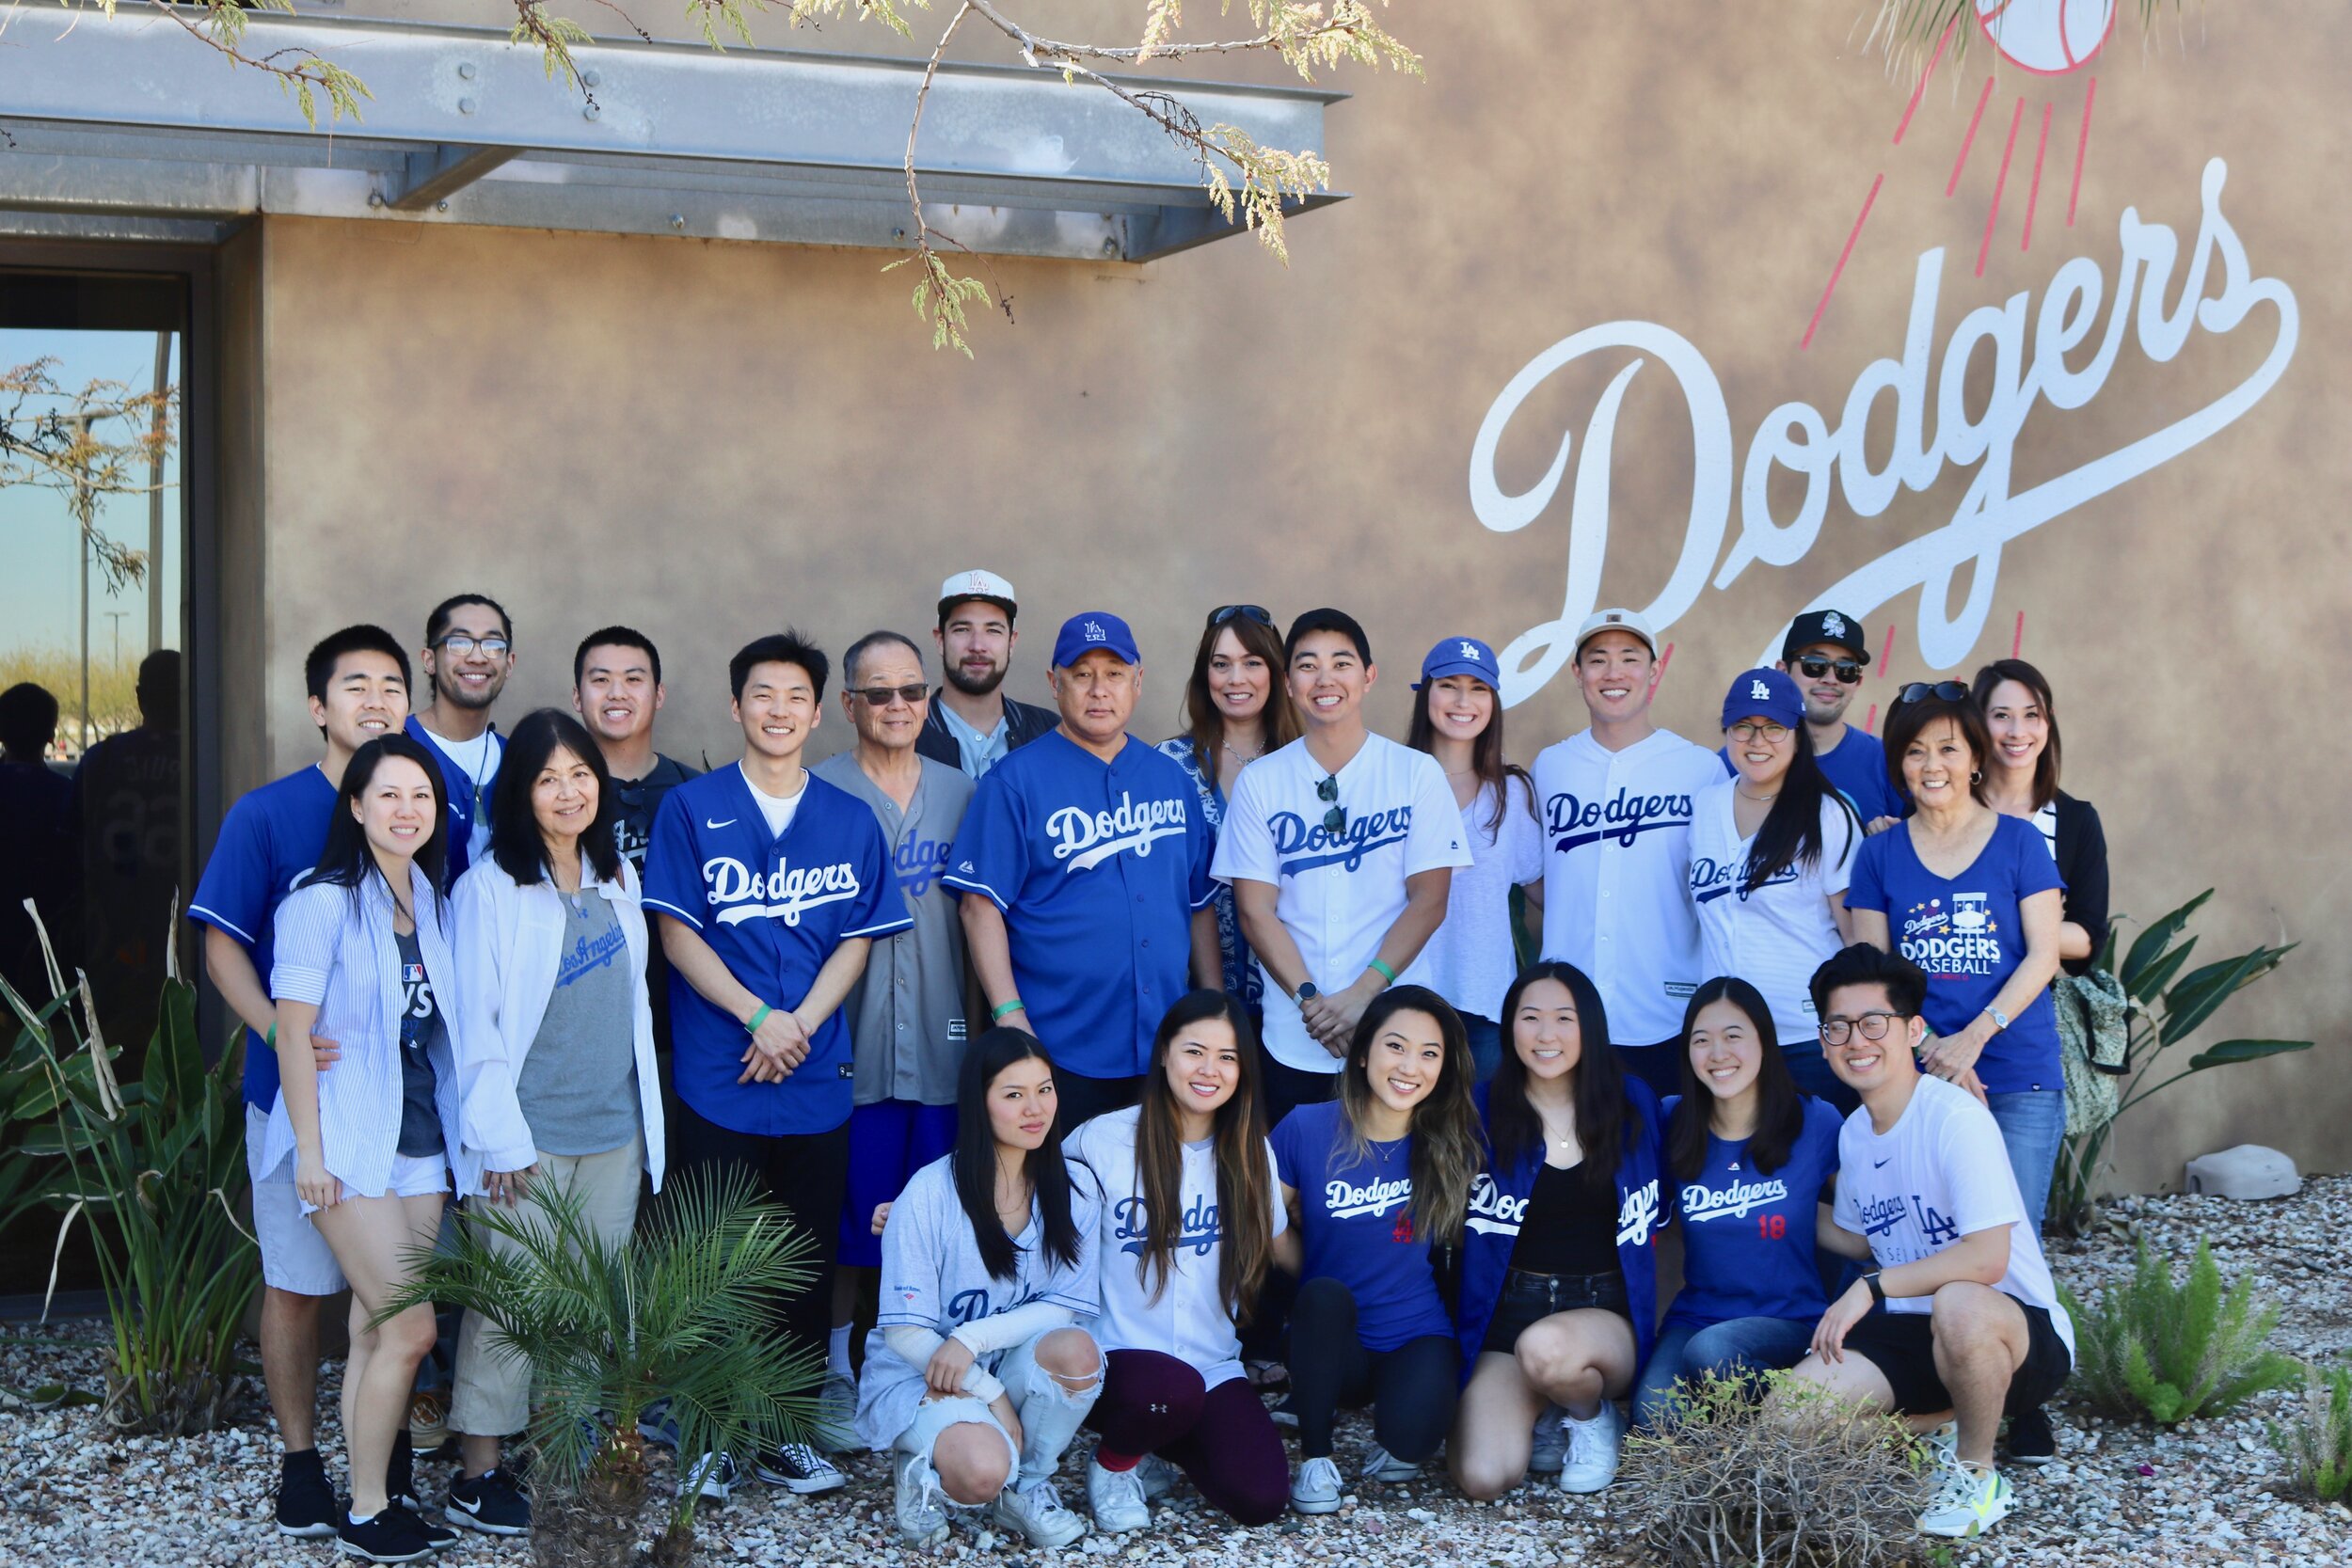 A large group of men and women smile wearing Dodger’s shirts in front of the Dodger’s painted sign on a building. 